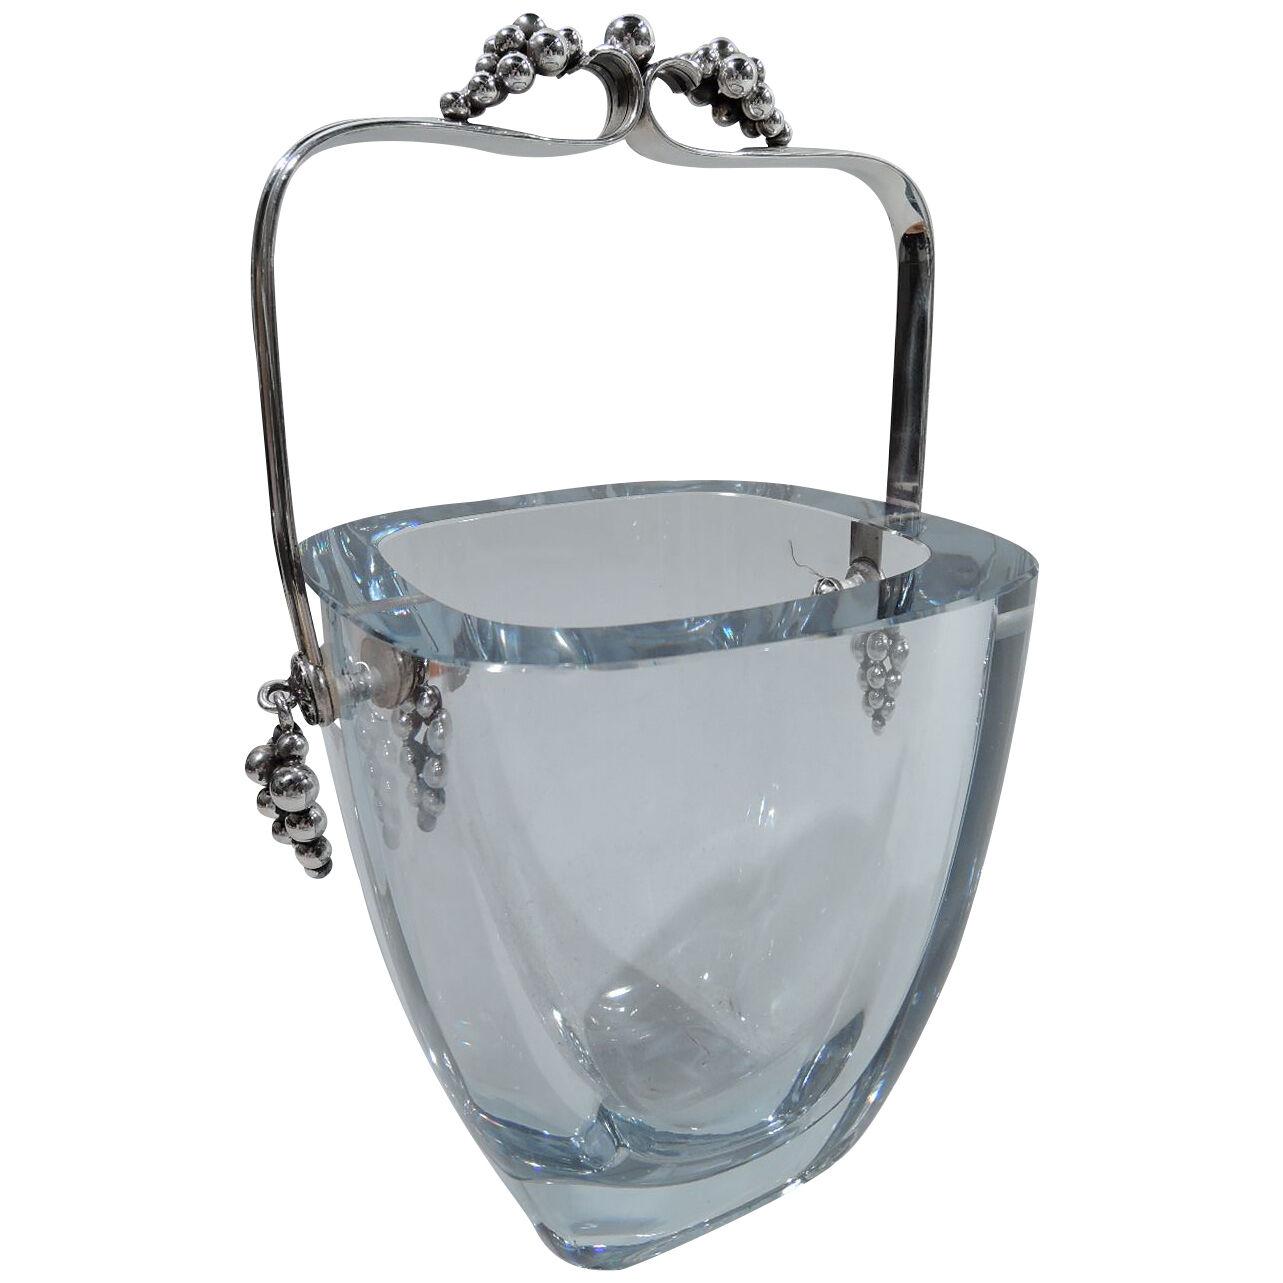 Danish Midcentury Modern Sterling Silver and Glass Ice Bucket